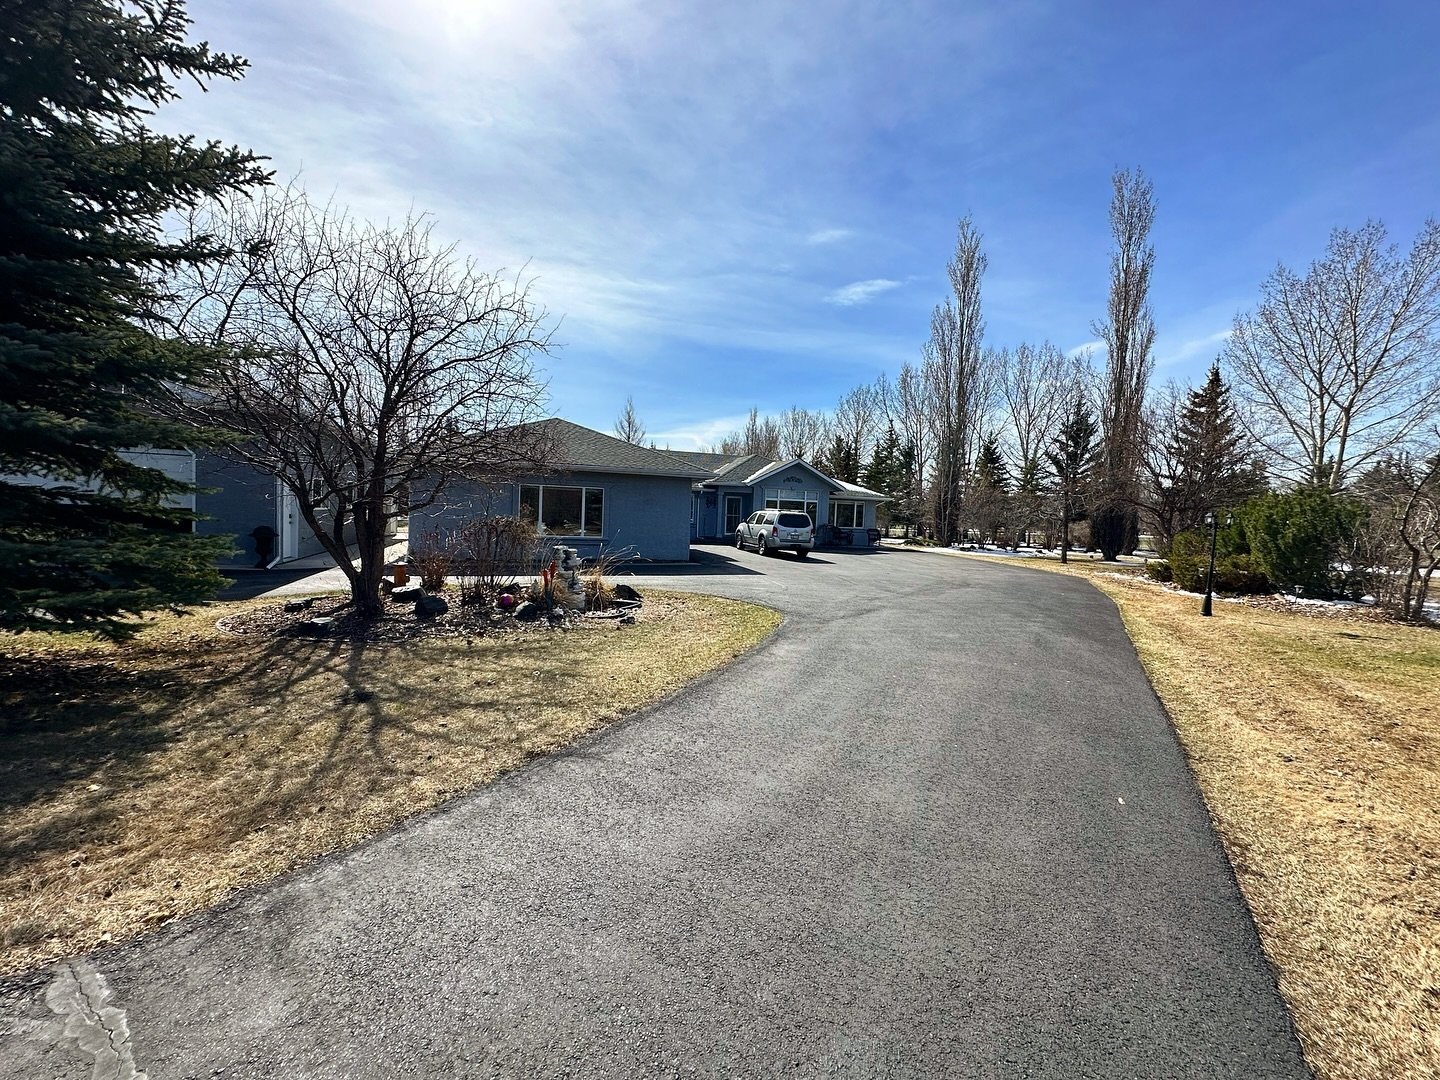 Silvertip drive, just at the south tip of Okotoks is the location for this amazing acreage!

Such a beautiful yard! With backyard retreat, two large size garages, a gym. Such a unique property! Amazing privacy, you feel you are away from it all! 

I 